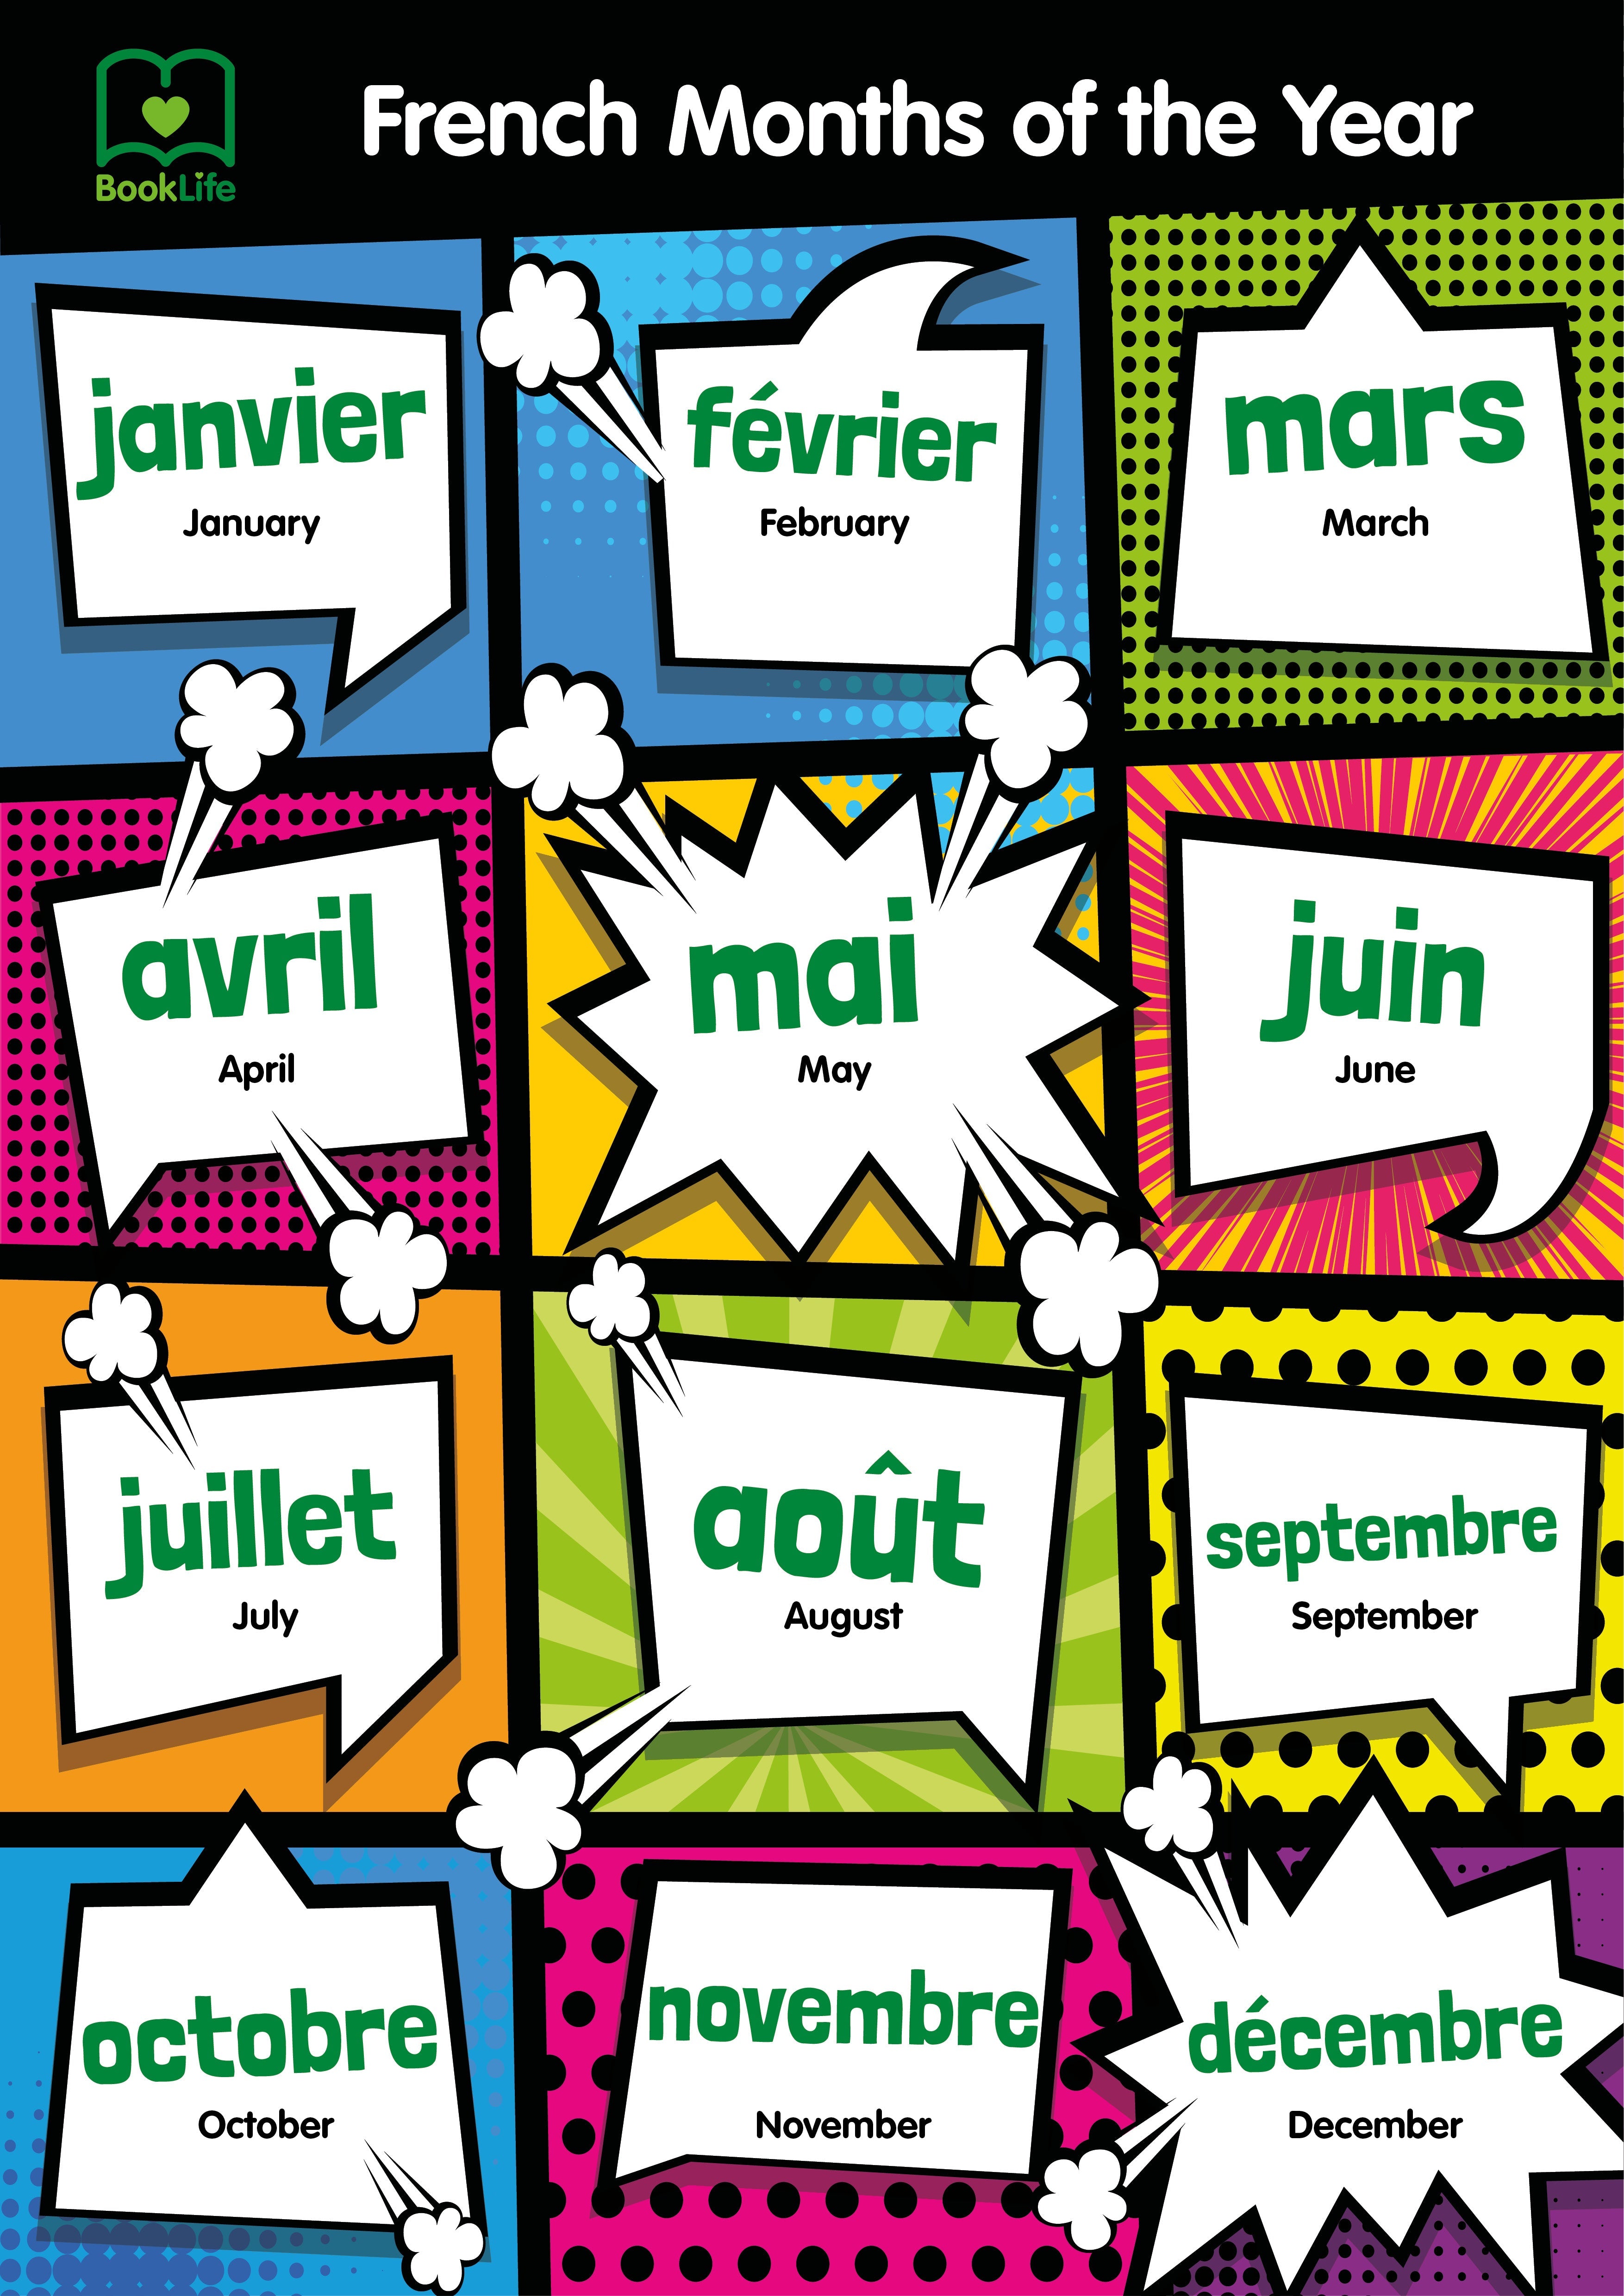 Free French Months of the Year Poster